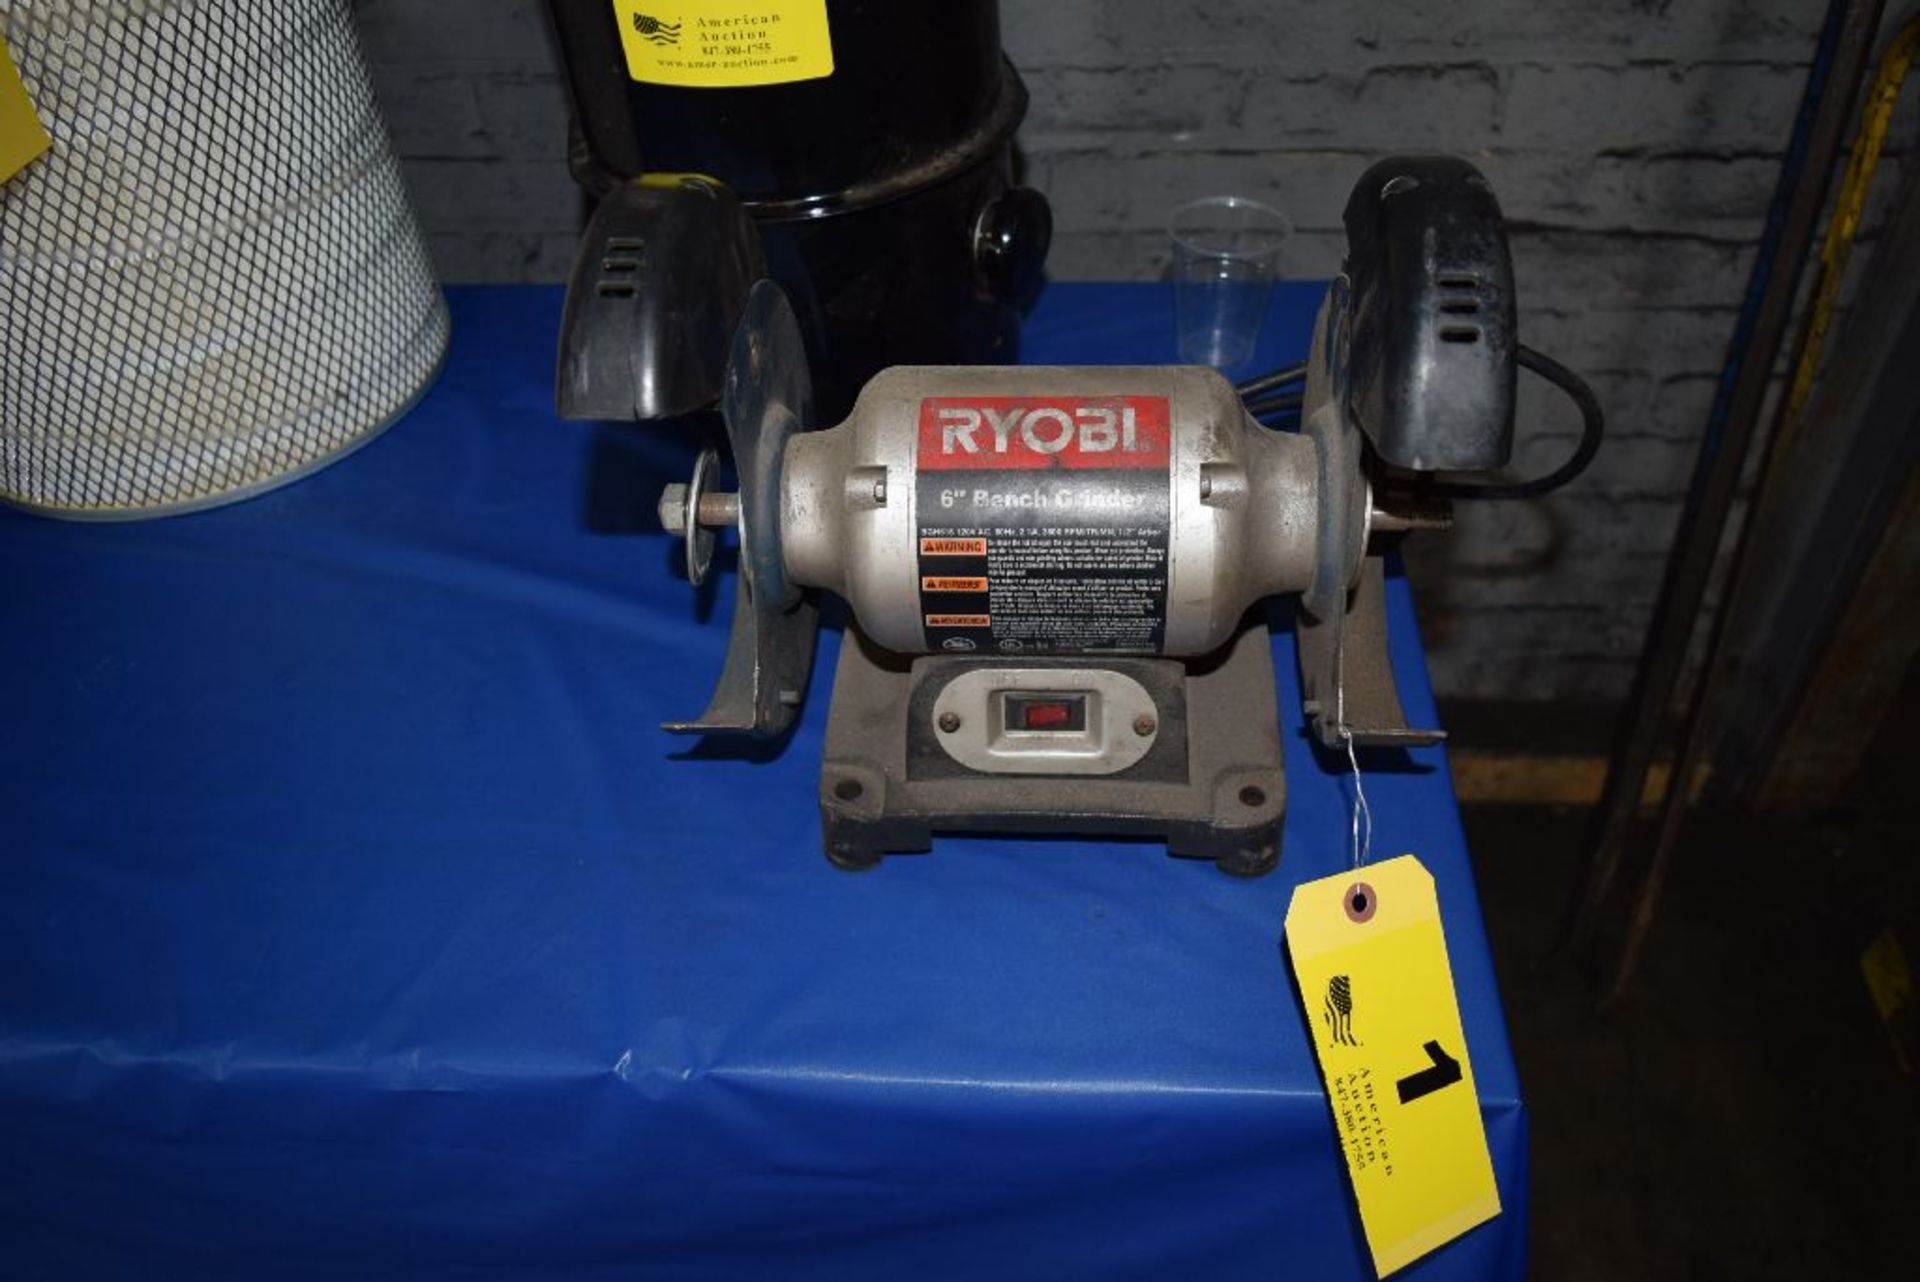 RYOBI 6" BENCH TOP DOUBLE END GRINDER S/N:W0623124293